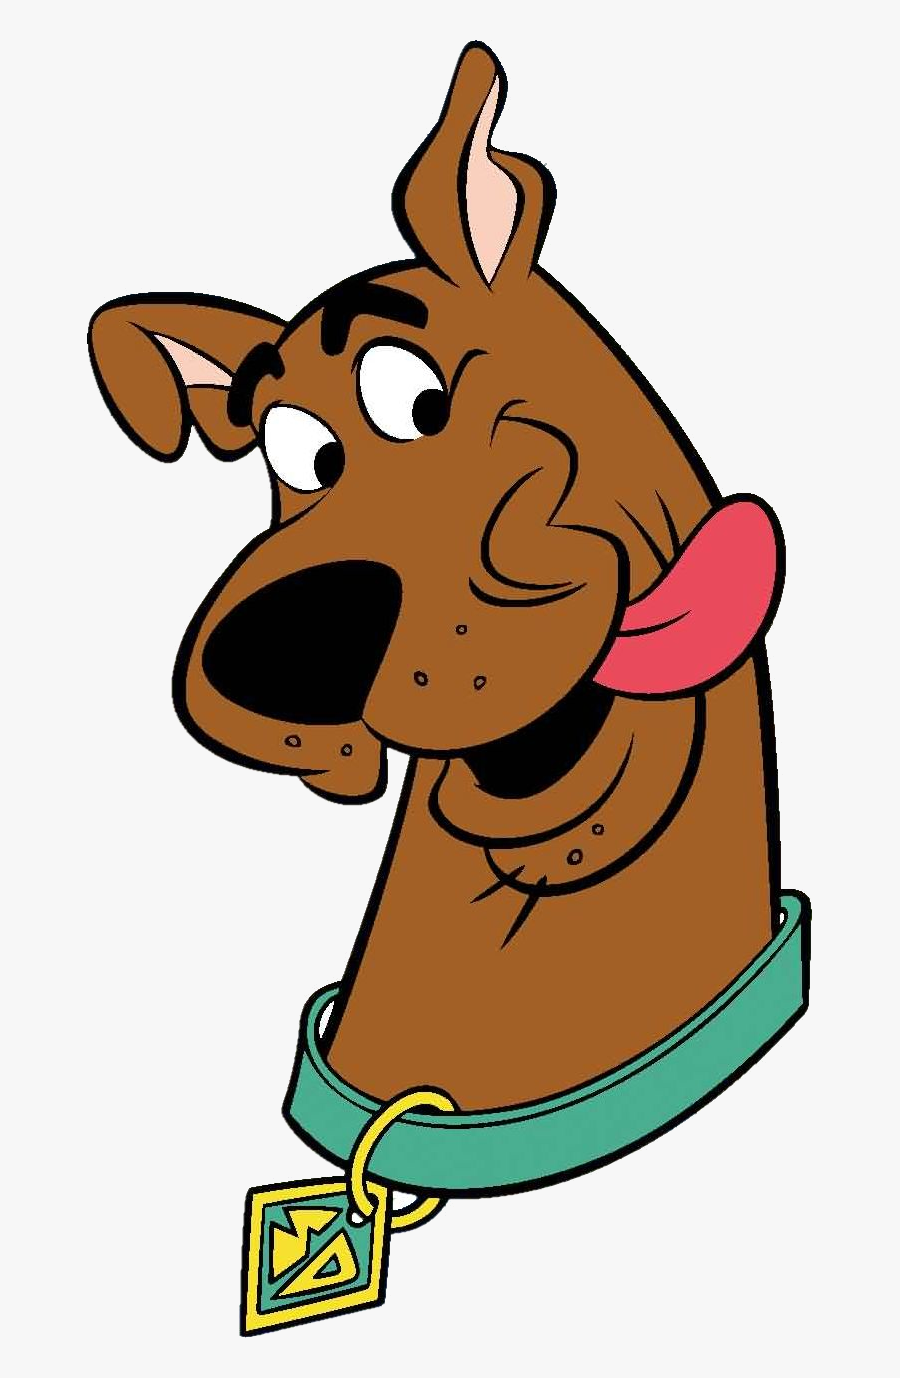 Scooby Doo Clipart Free Best On Transparent Png - Scooby Doo Png, Transparent Clipart